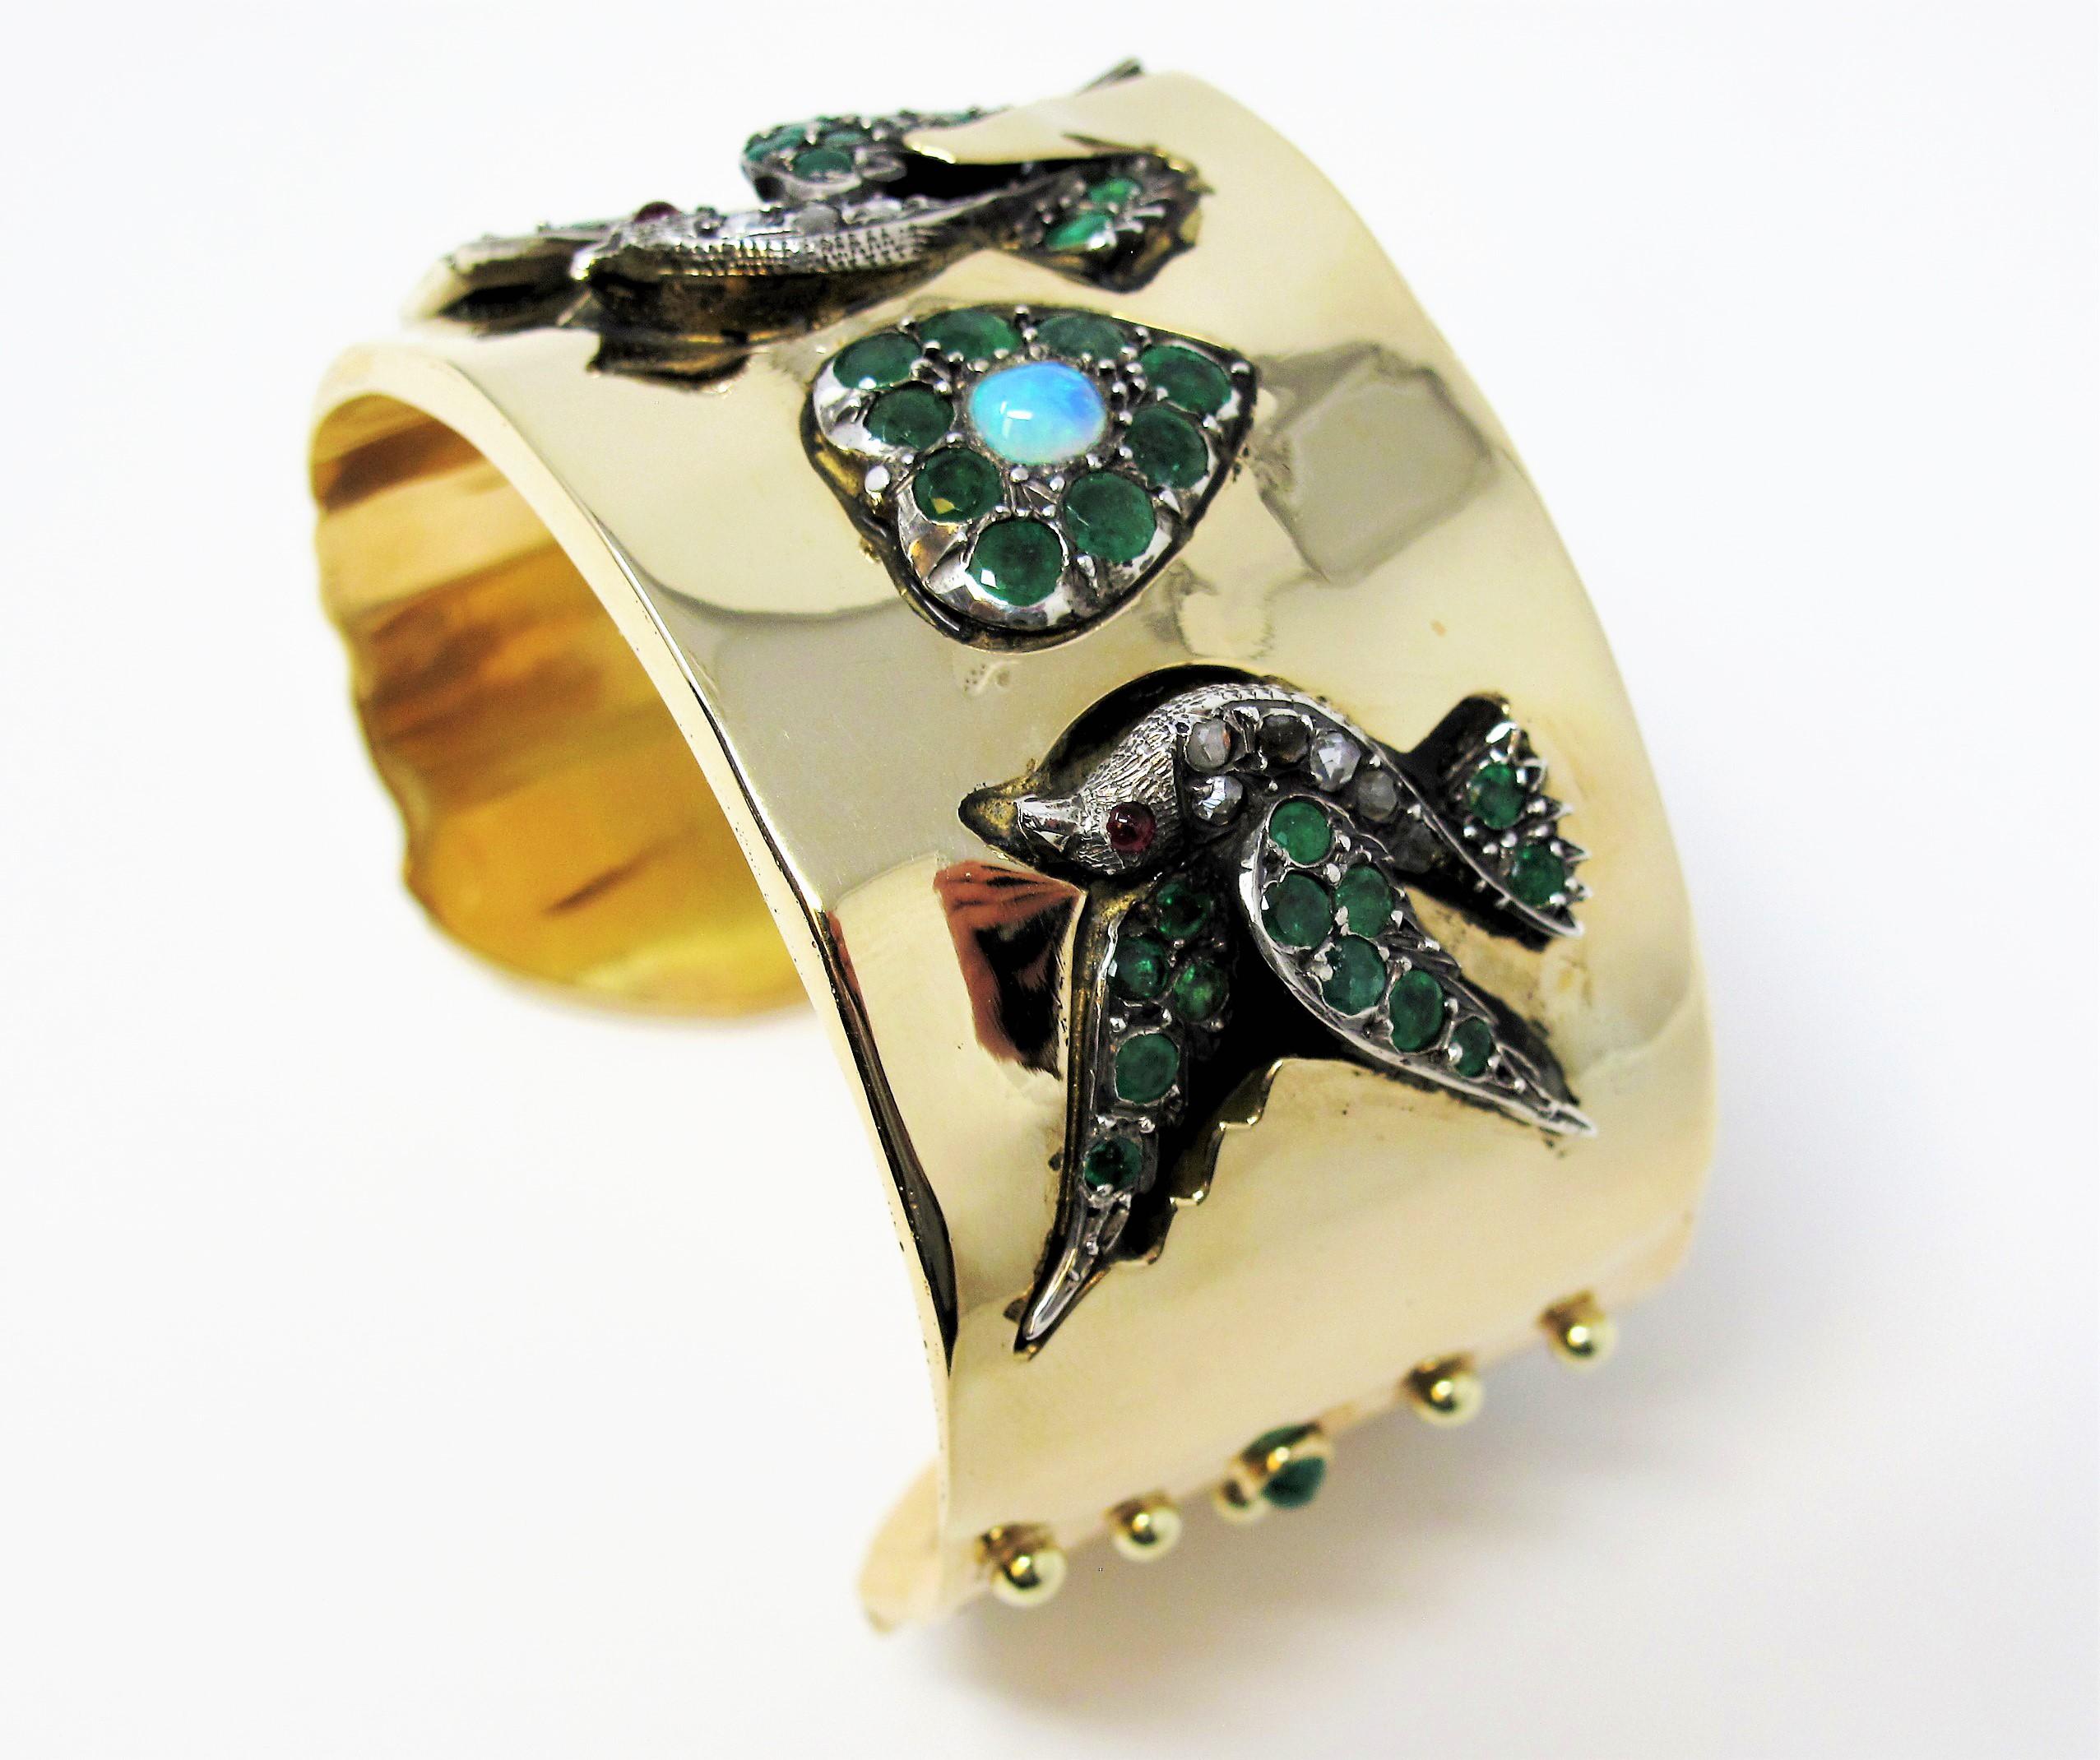 Incredible, one of a kind custom embellished gold cuff bracelet by renowned jeweler, Yossi Gabay. This remarkable piece will draw plenty of attention to your wrist with its bold, colorful design, meticulous attention to detail, and unique